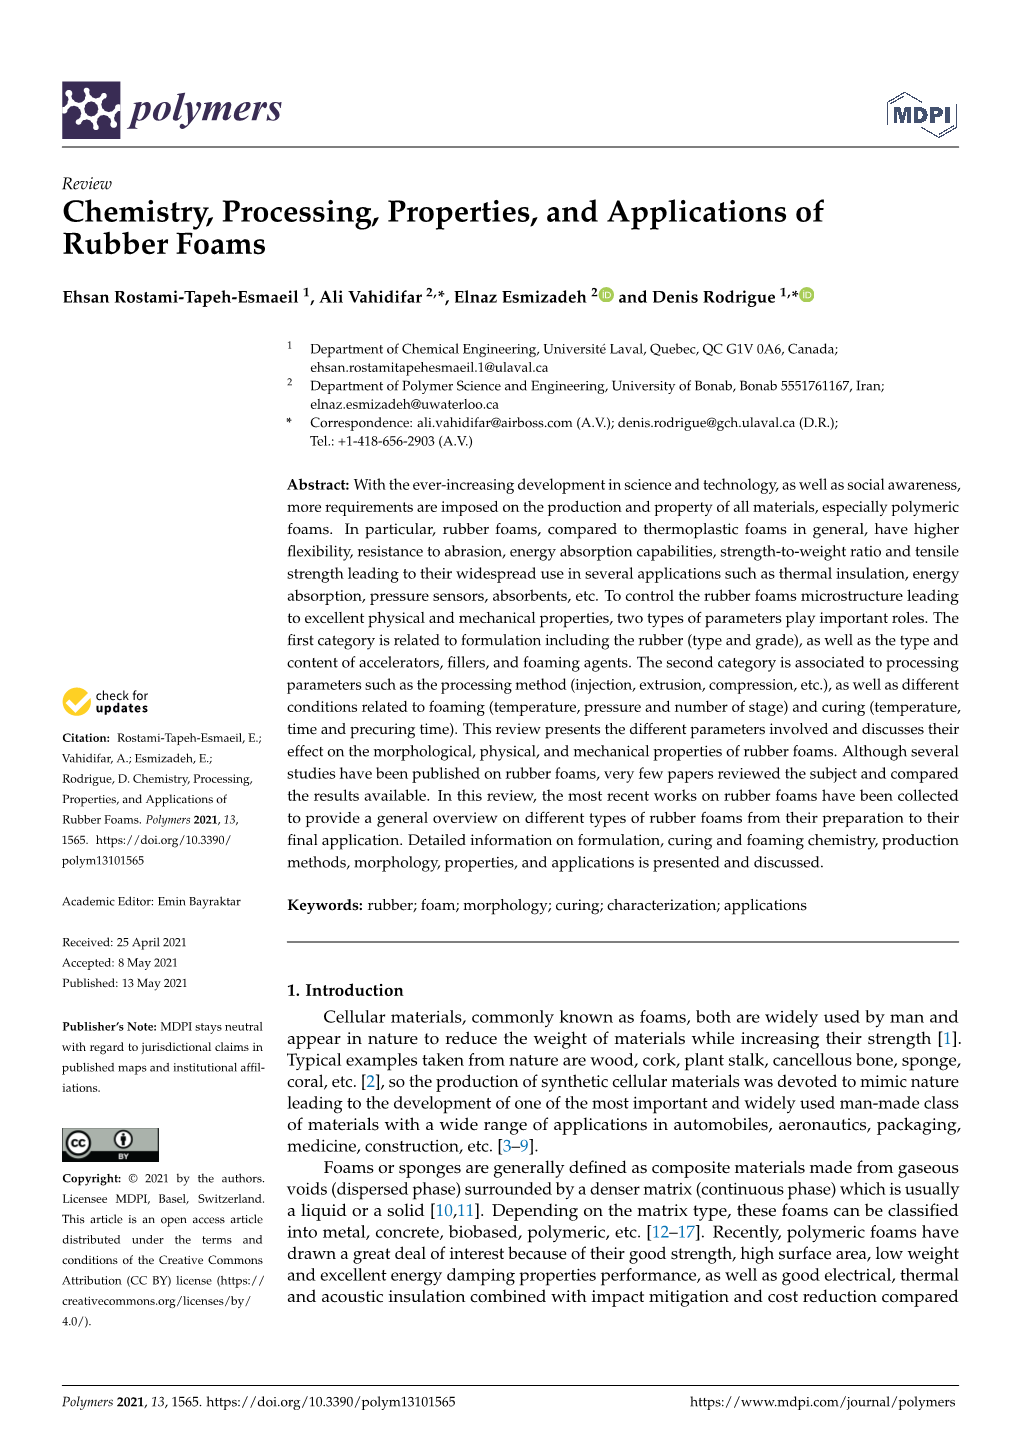 Chemistry, Processing, Properties, and Applications of Rubber Foams